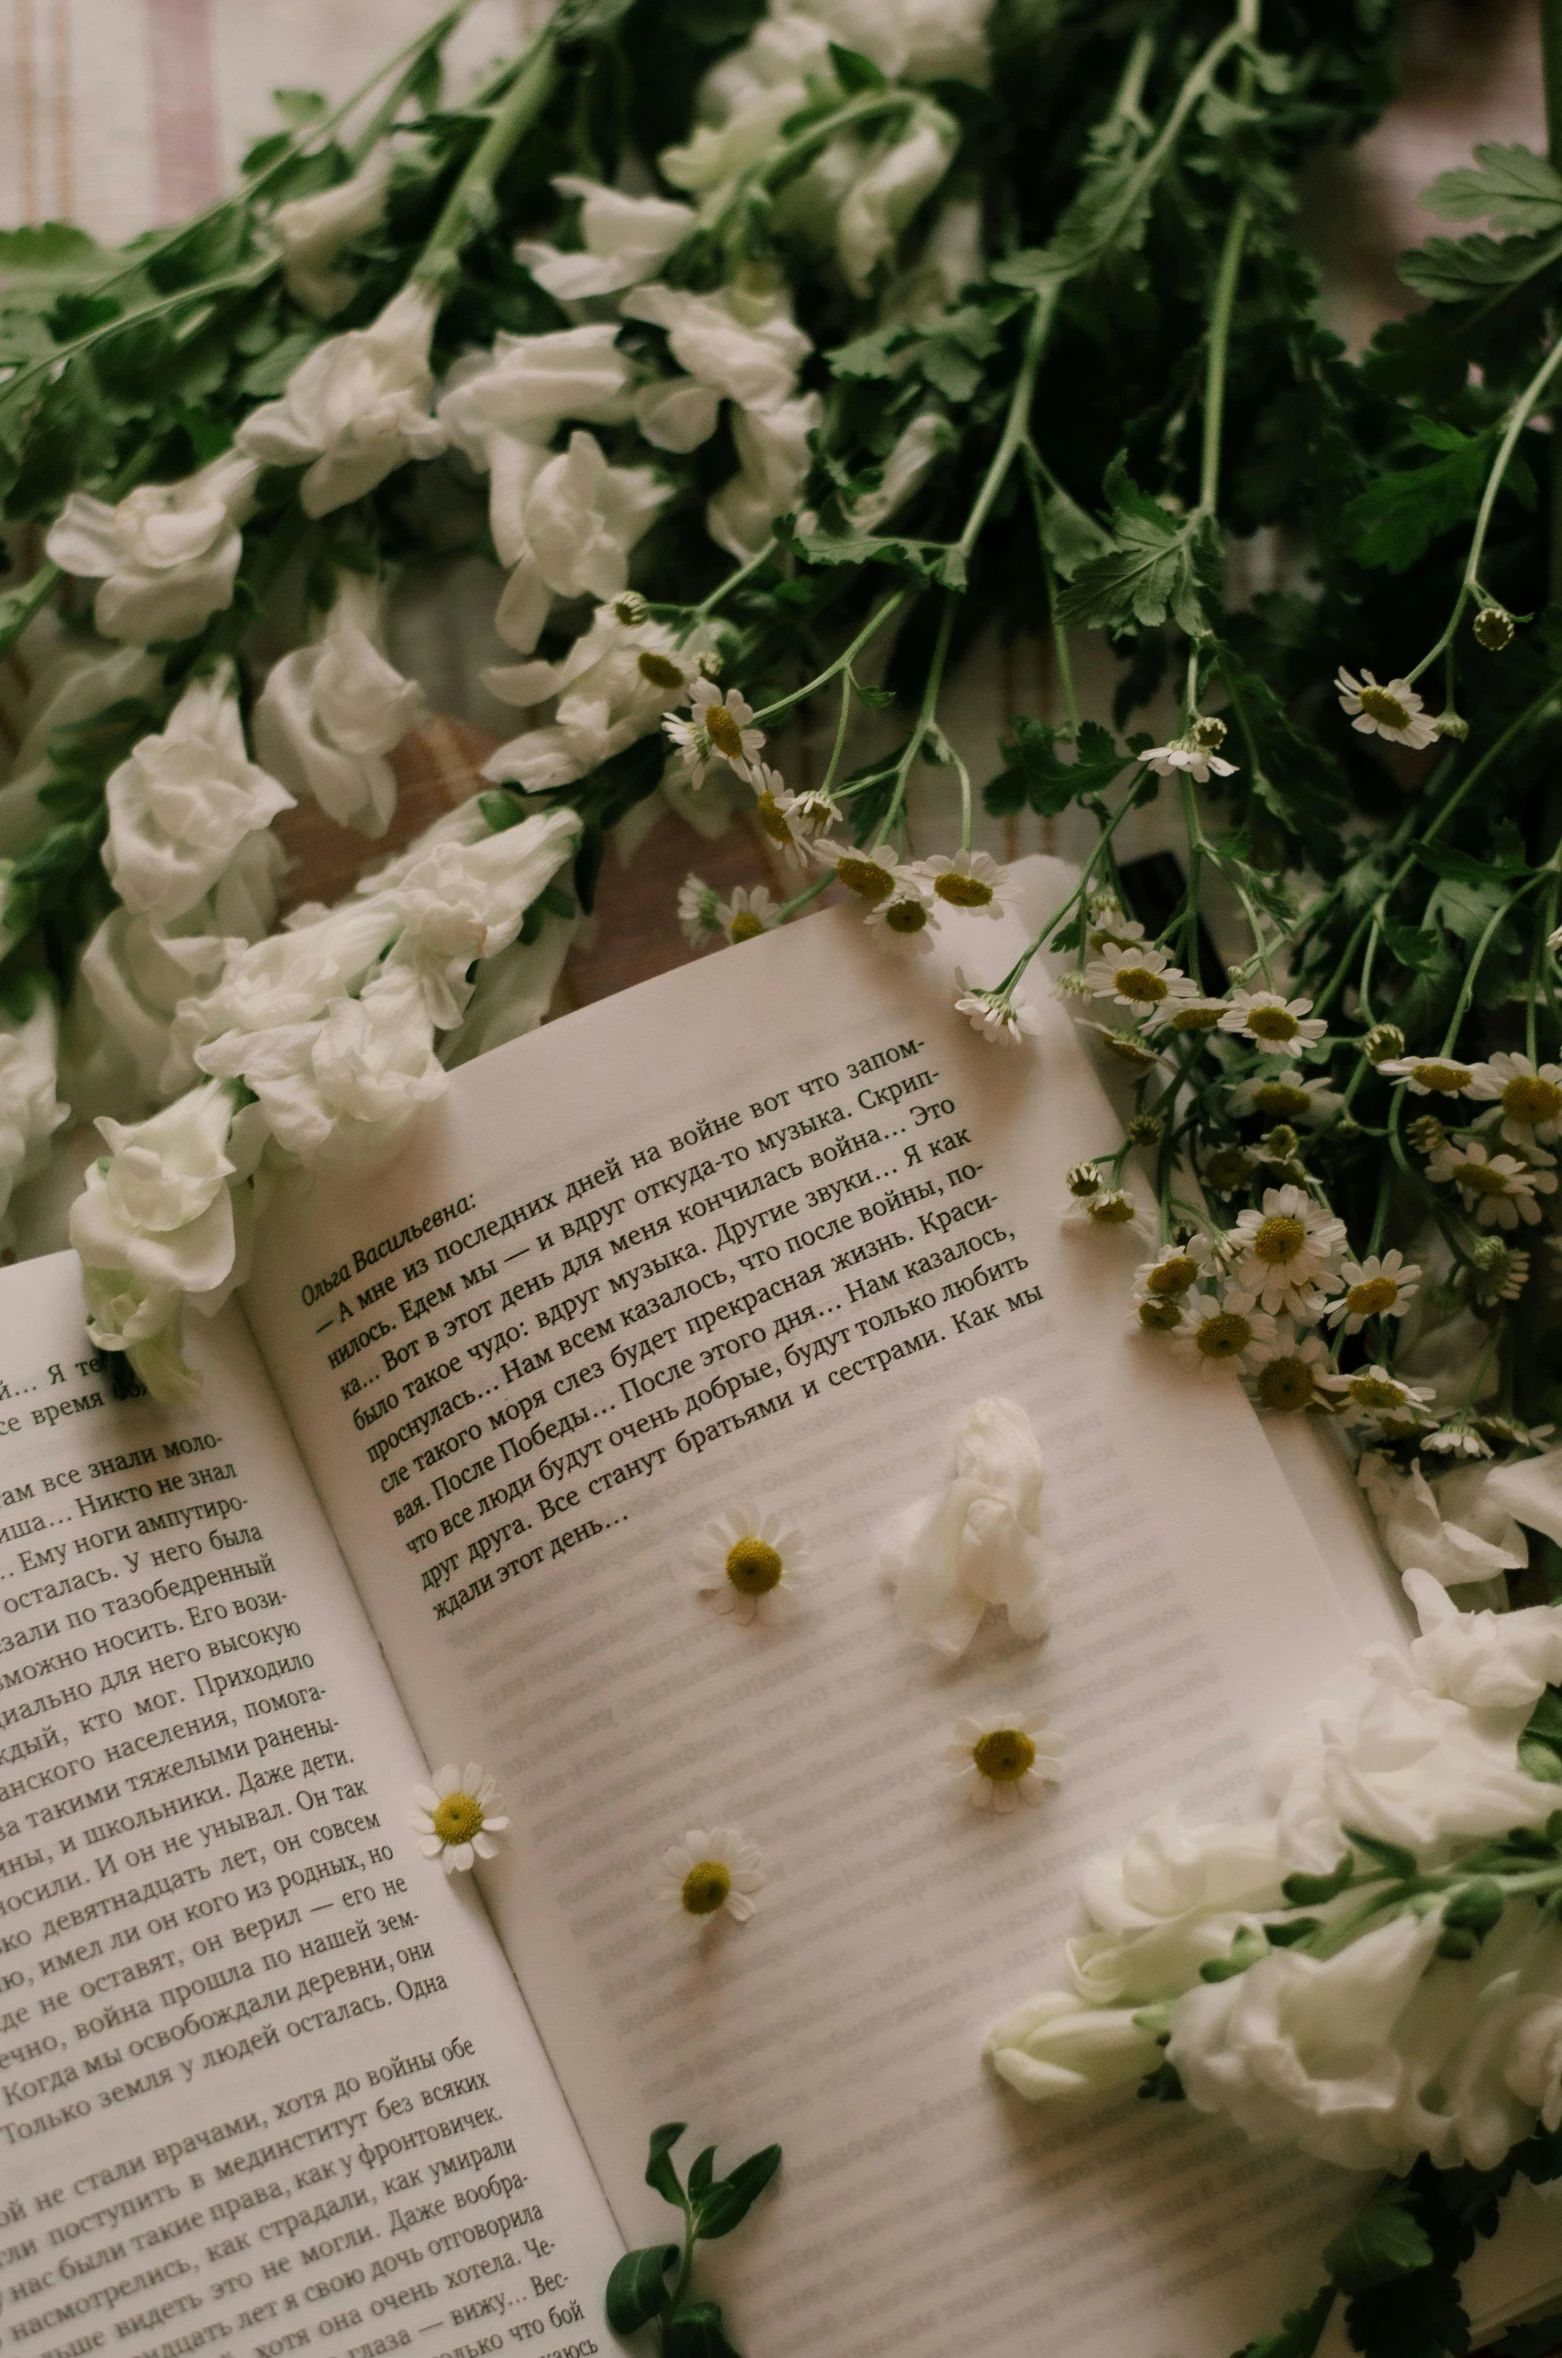 an open book with flowers next to it on the ground